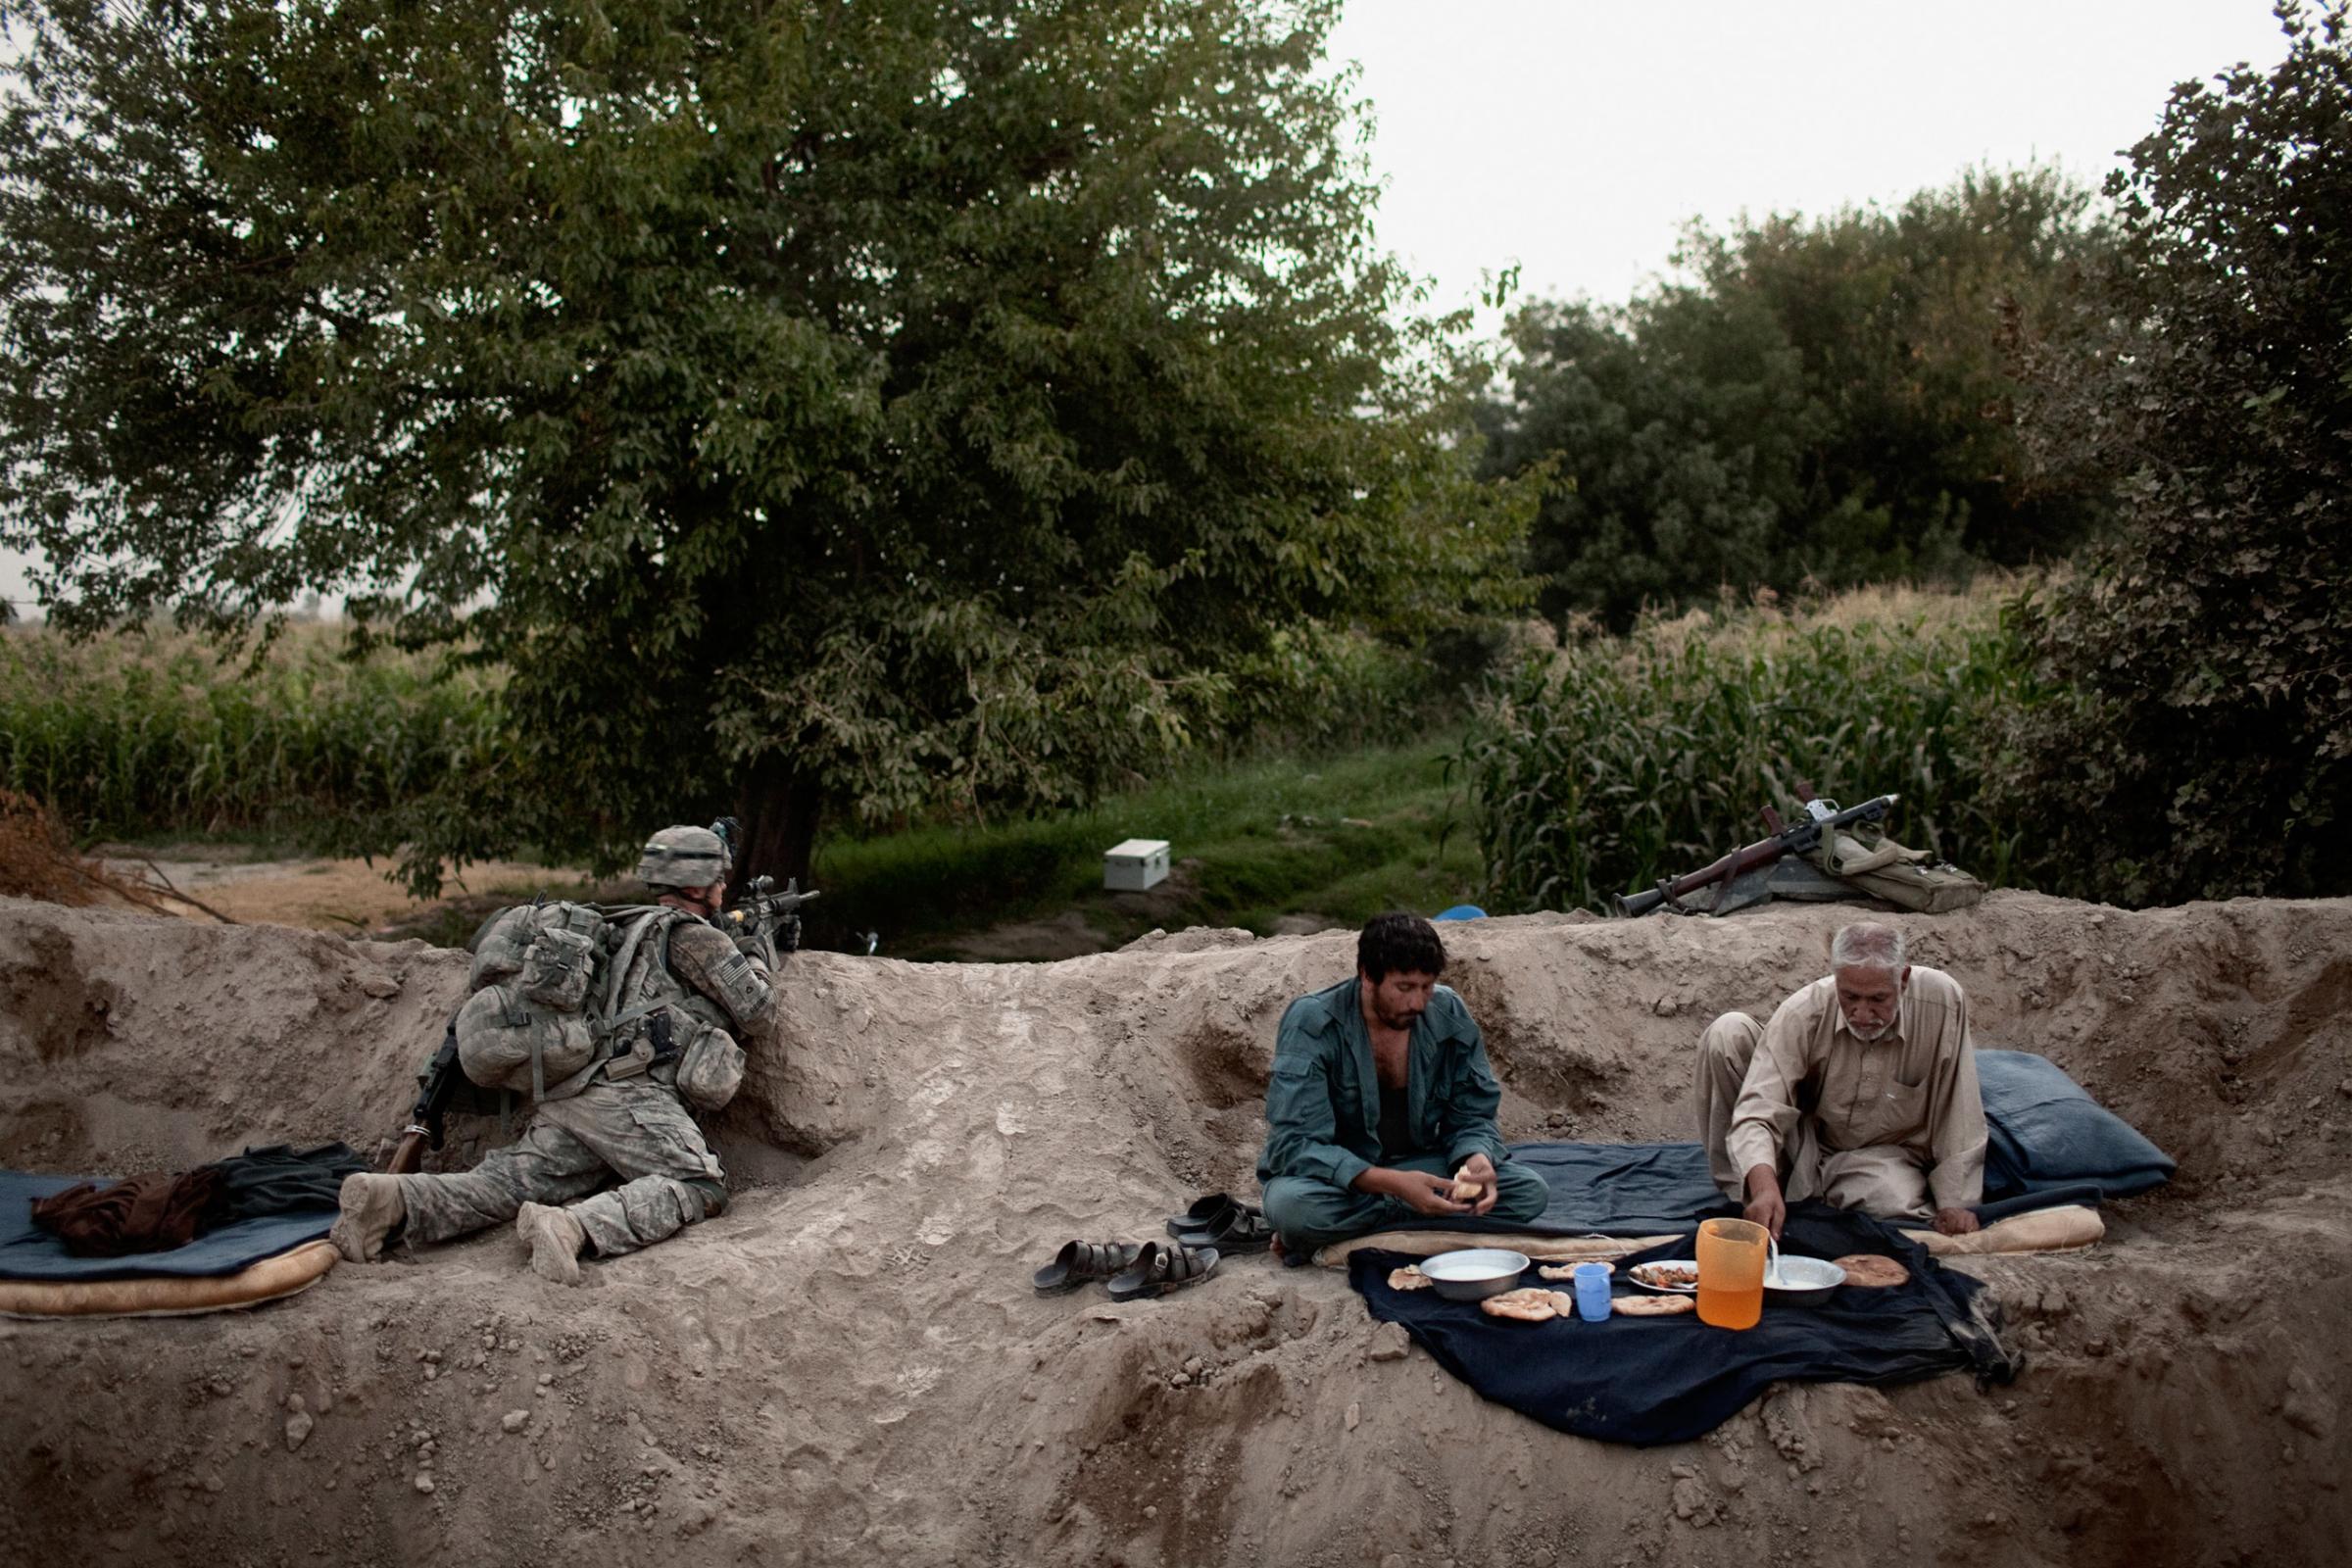 Afghan National Police broke their fast for Iftar during Ramadan while a soldier from the 504th U.S. Military Police Battalion provided security in the Mehlajat area of Kandahar City, Afghanistan on September 6, 2010. Photo by Adam Ferguson